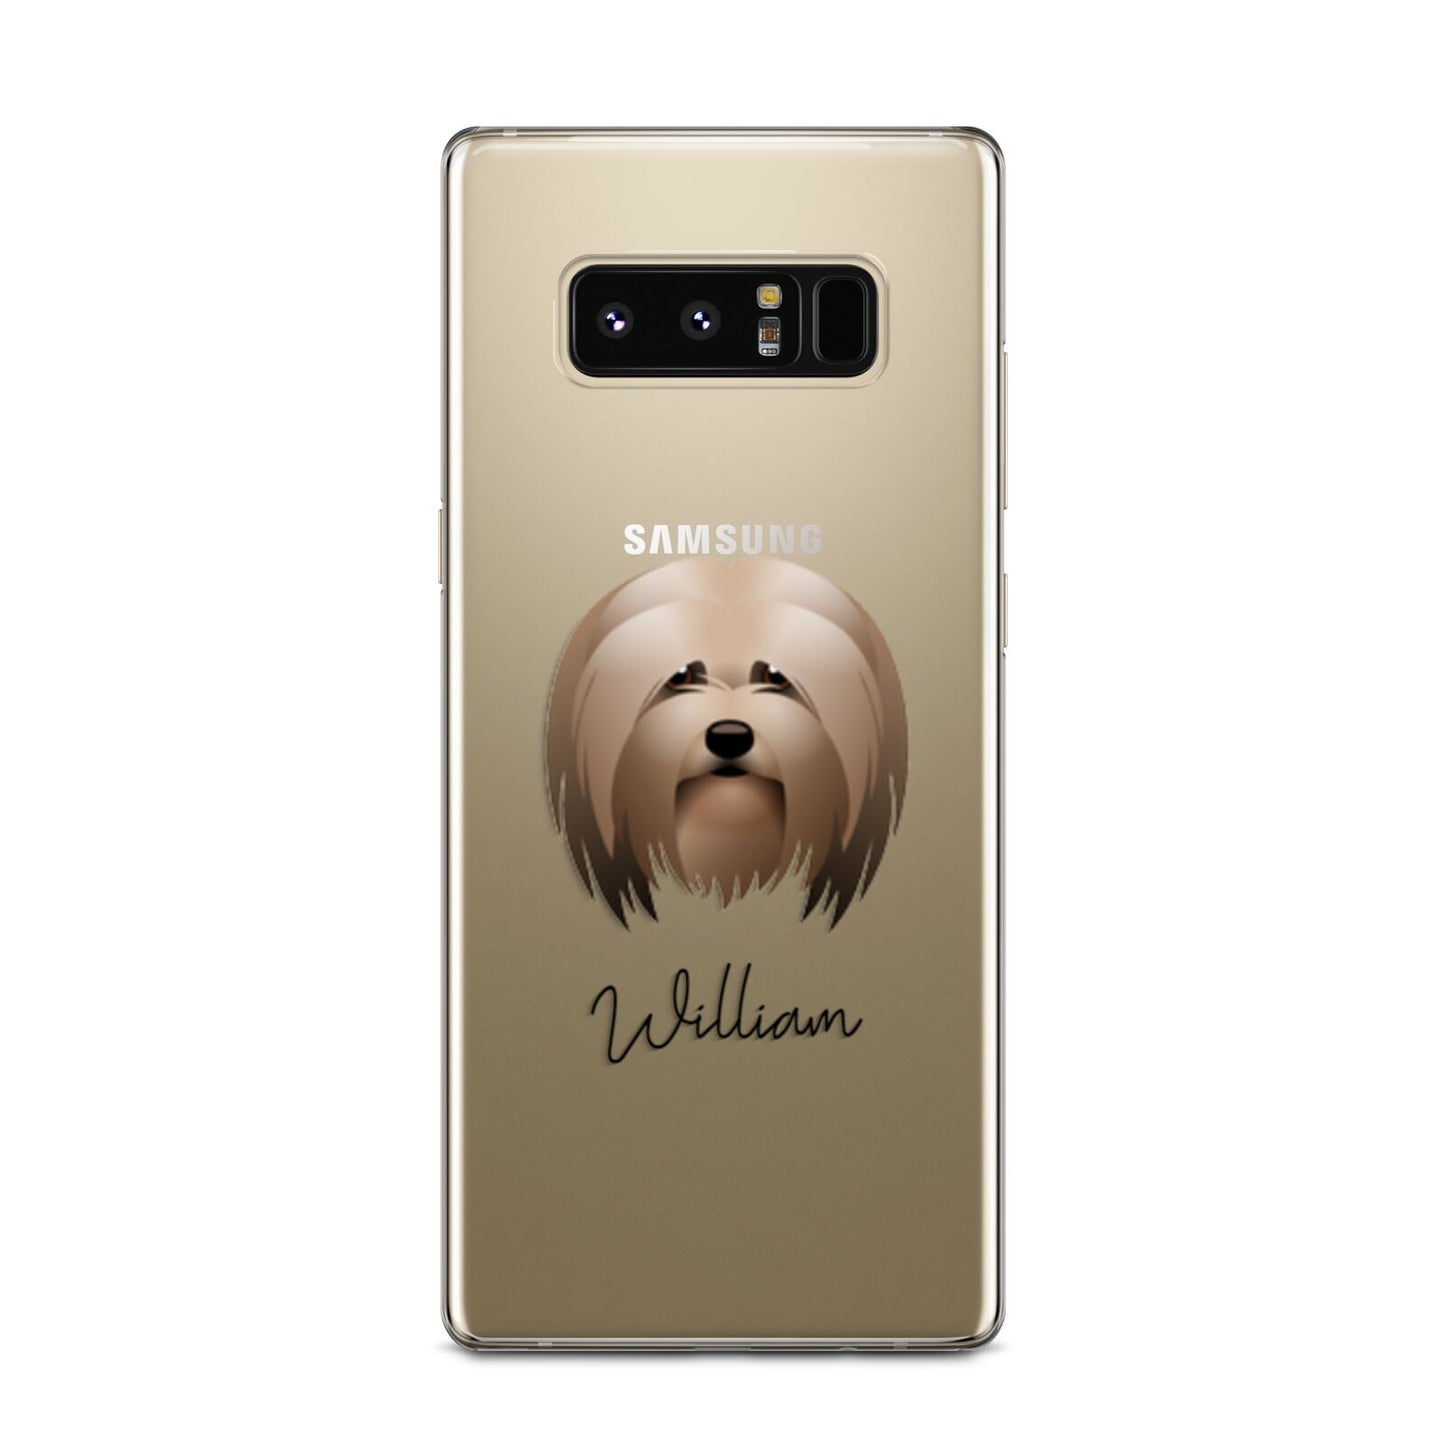 Lhasa Apso Personalised Samsung Galaxy Note 8 Case